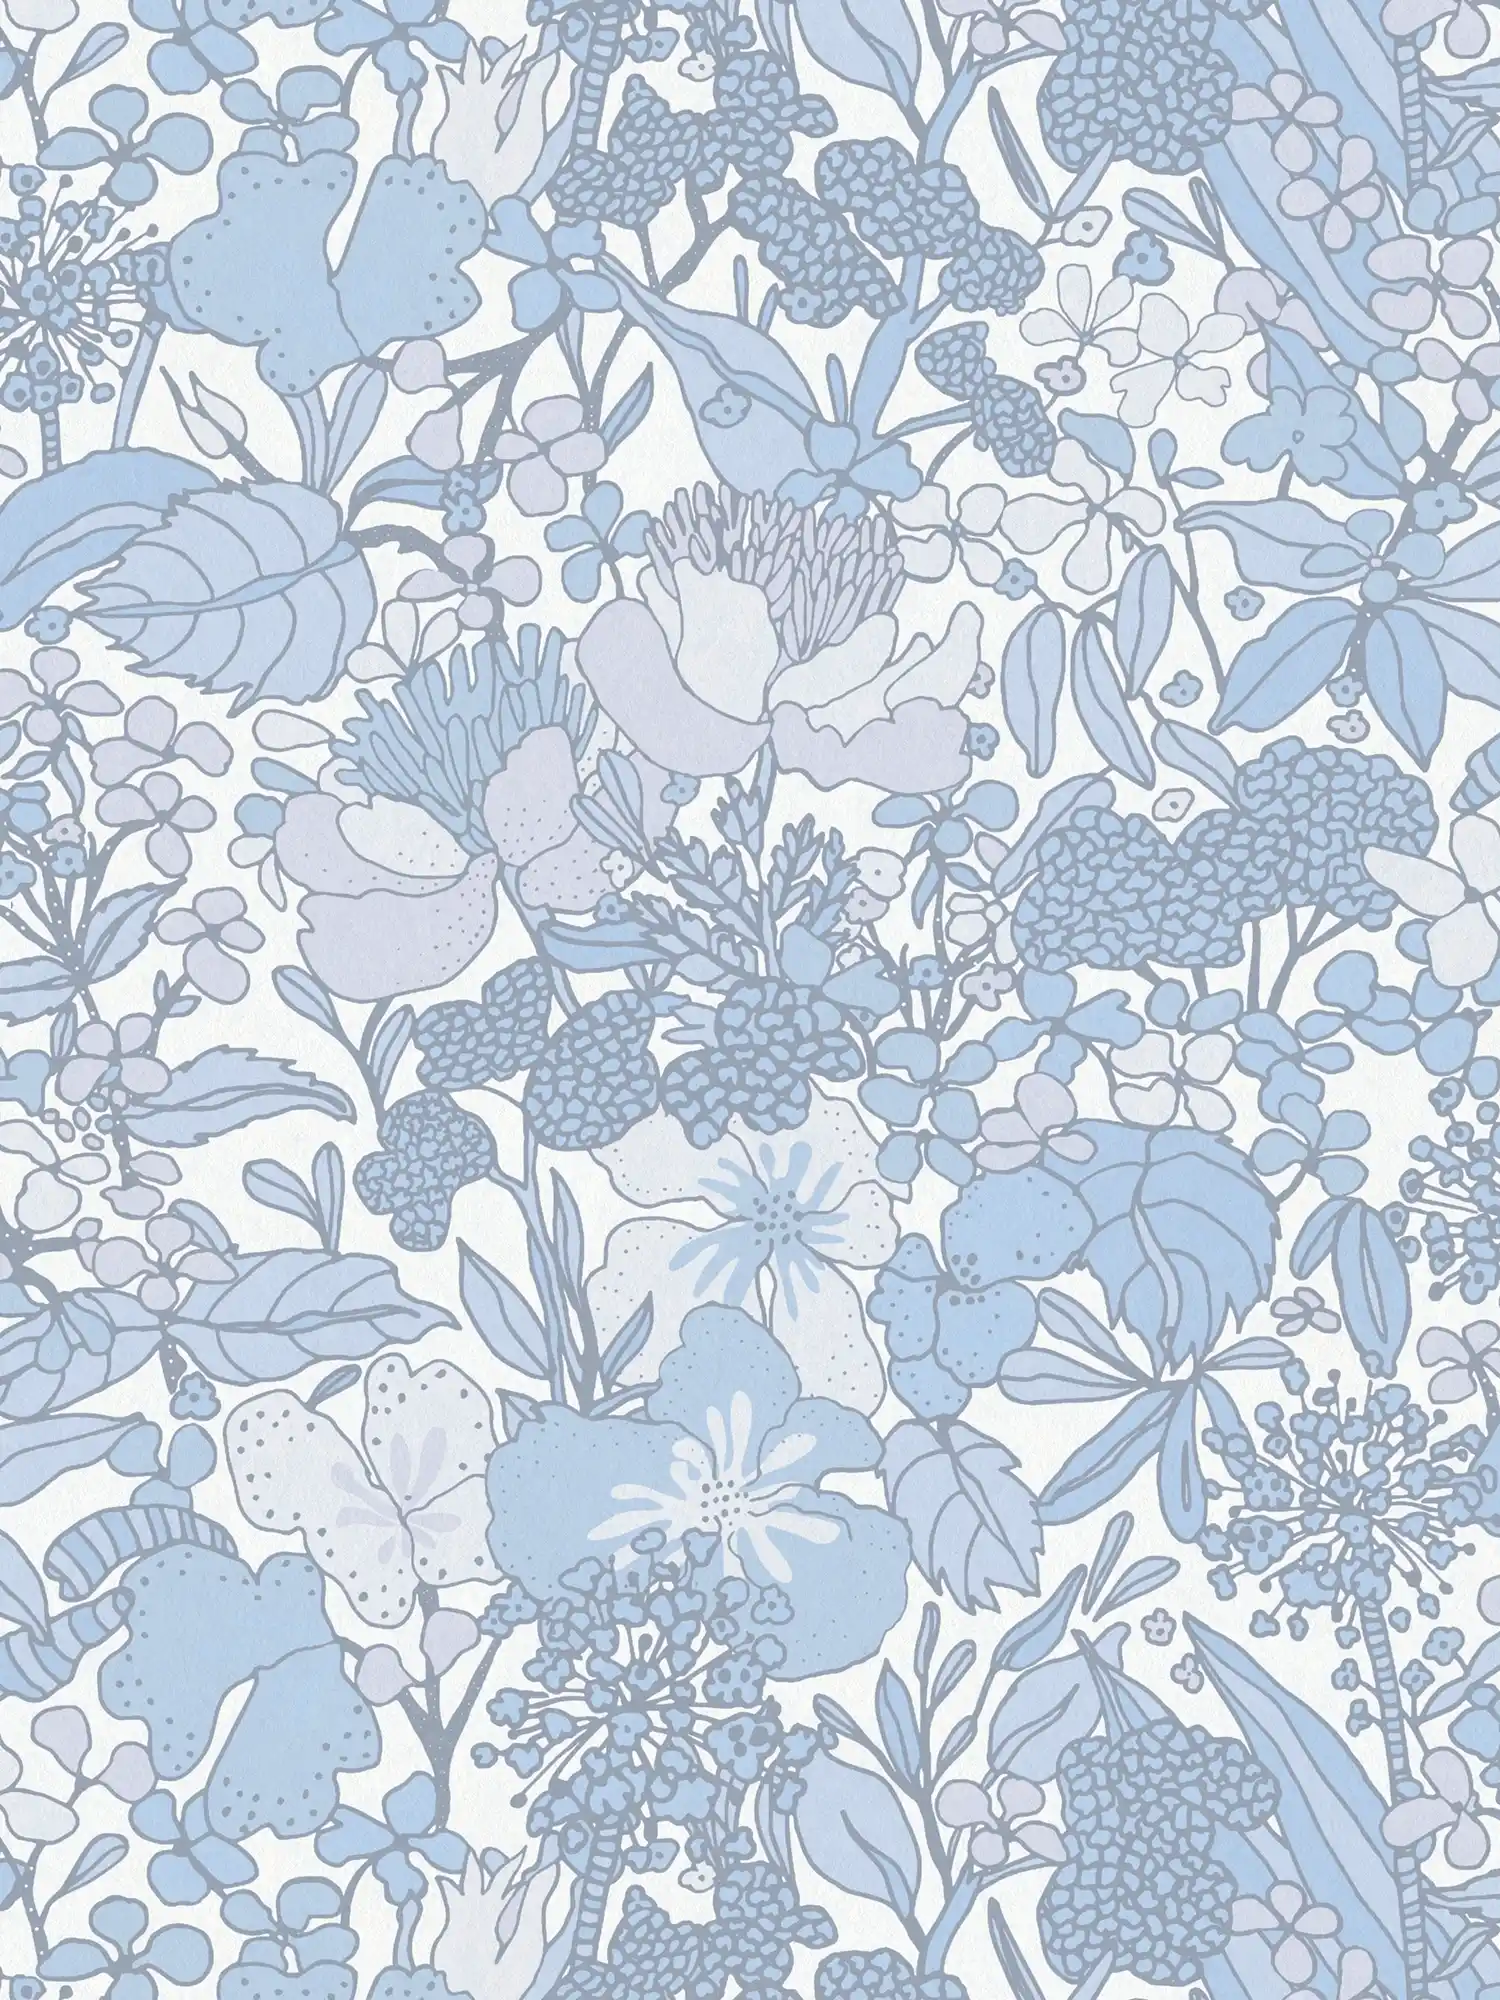 Wallpaper blue & white with 70s retro floral pattern - grey, blue, white
